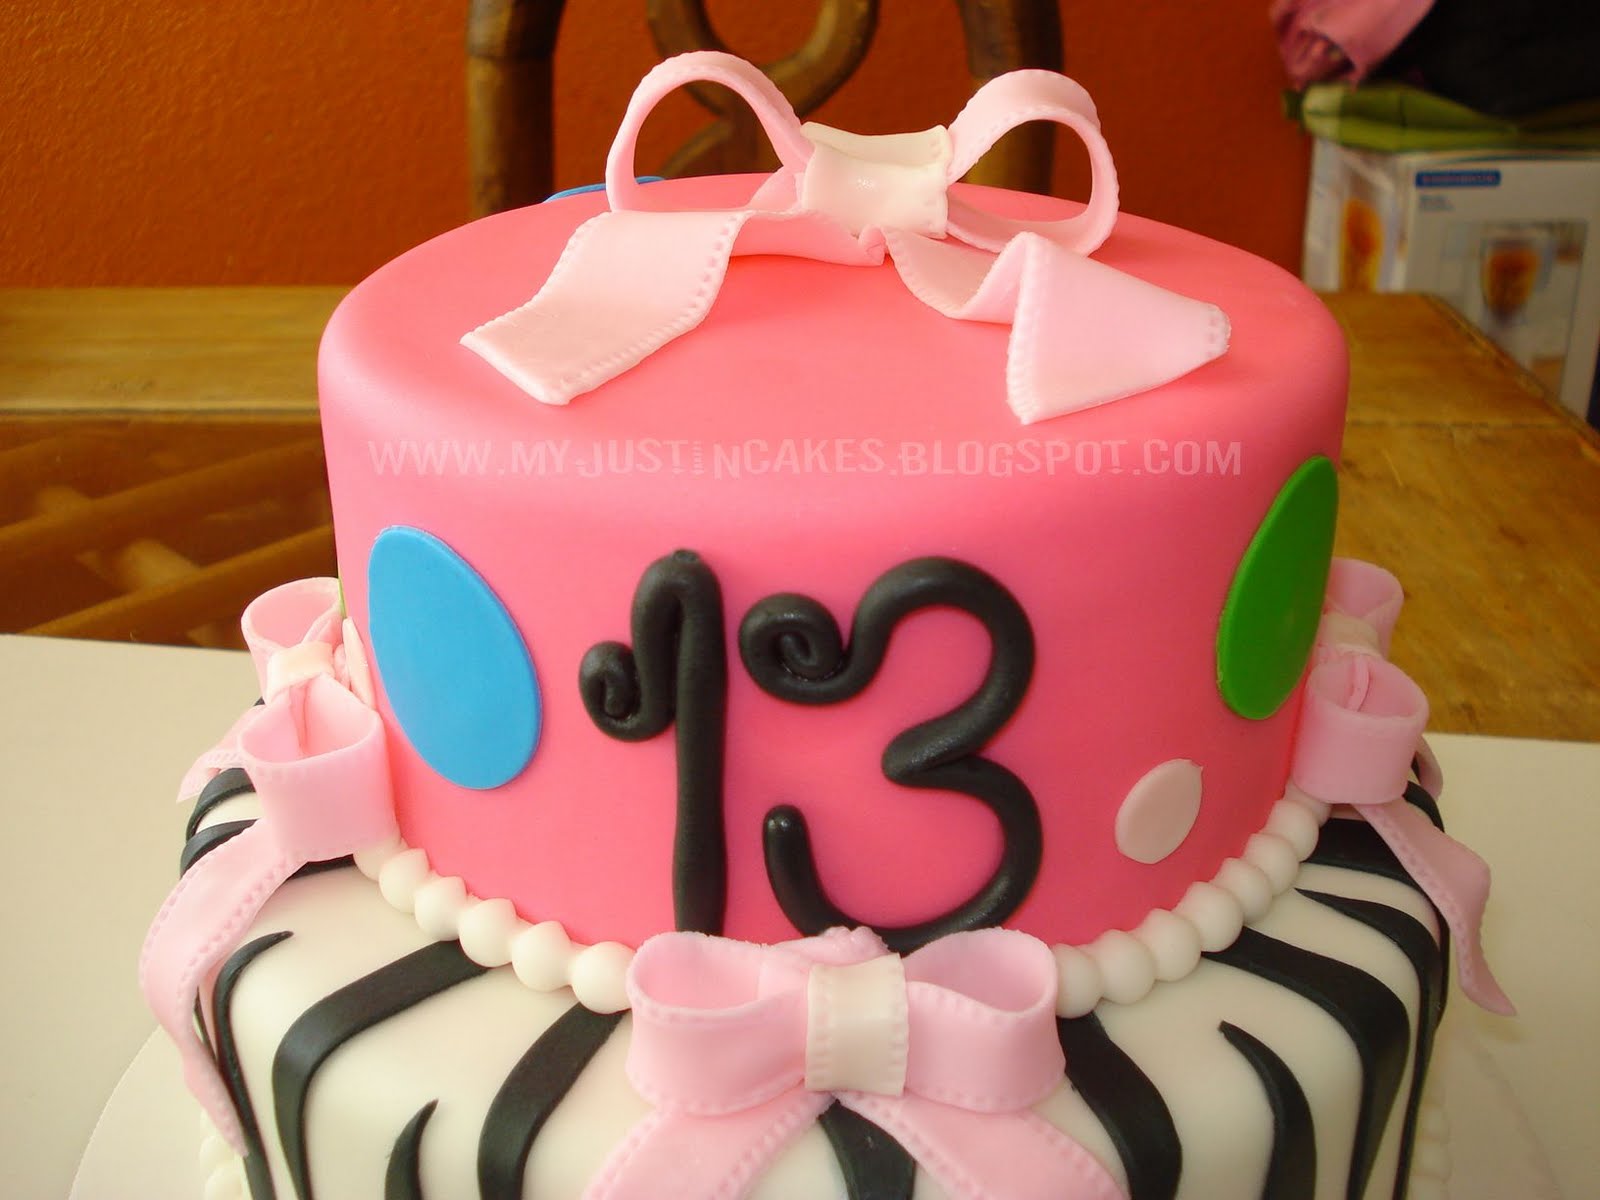 Just in Cakes: 13 Year Old Girl Birthday Cake